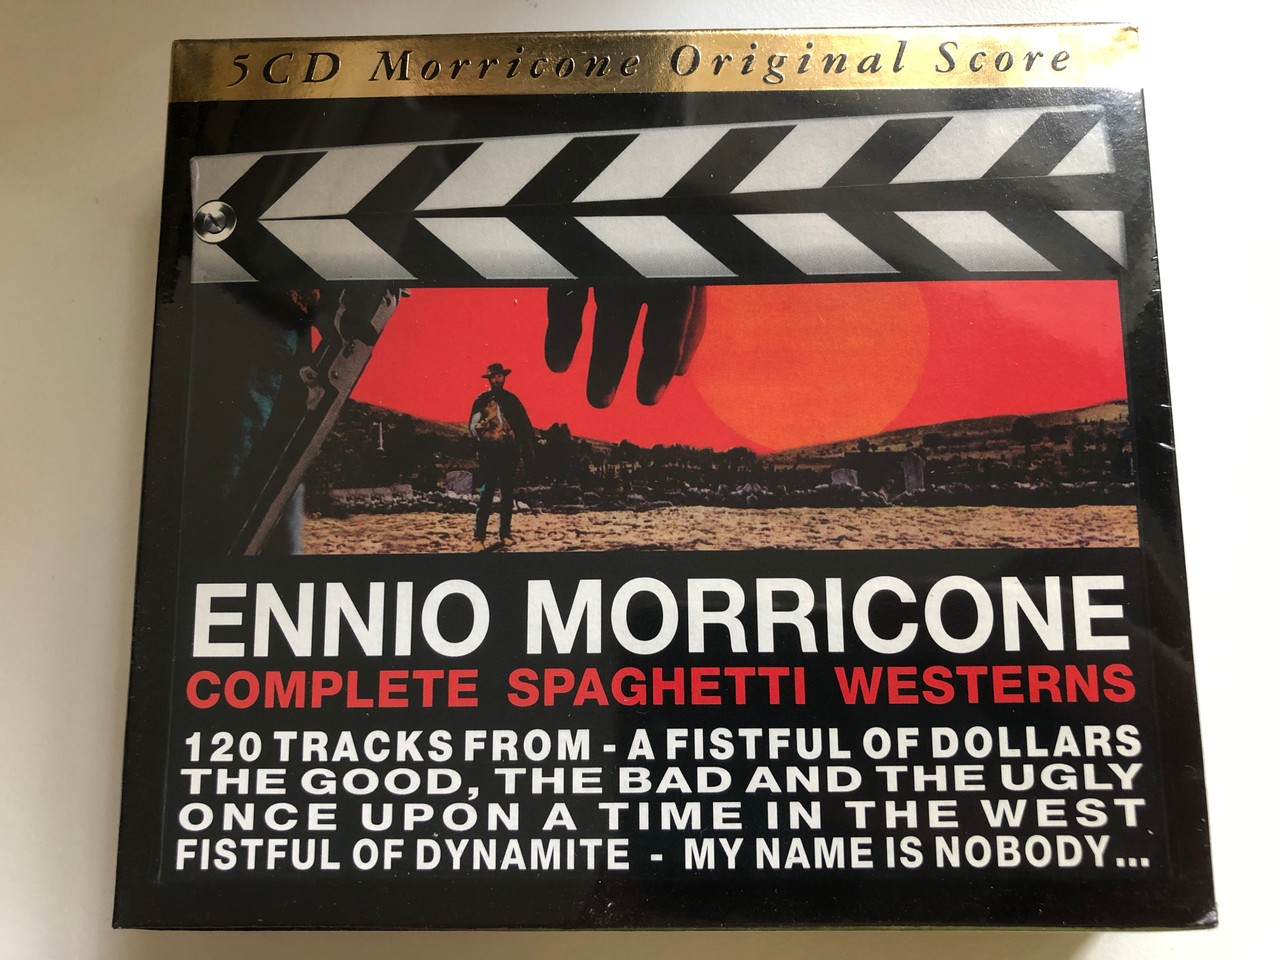 https://cdn10.bigcommerce.com/s-62bdpkt7pb/products/0/images/227215/Ennio_Morricone_Complete_Spaghetti_Westerns_120_Tracks_From_-_A_Fistful_Of_Dollars_The_Good_The_Bad_And_The_Ugly_Once_Upon_A_Time_In_The_West_Fistful_Of_Fynamite_Recording_Arts_5x_Audi_1__74431.1652244808.1280.1280.JPG?c=2&_gl=1*1kwtvkt*_ga*MjA2NTIxMjE2MC4xNTkwNTEyNTMy*_ga_WS2VZYPC6G*MTY1MjI0MjQyNC4zOTAuMS4xNjUyMjQ0NDEwLjEz